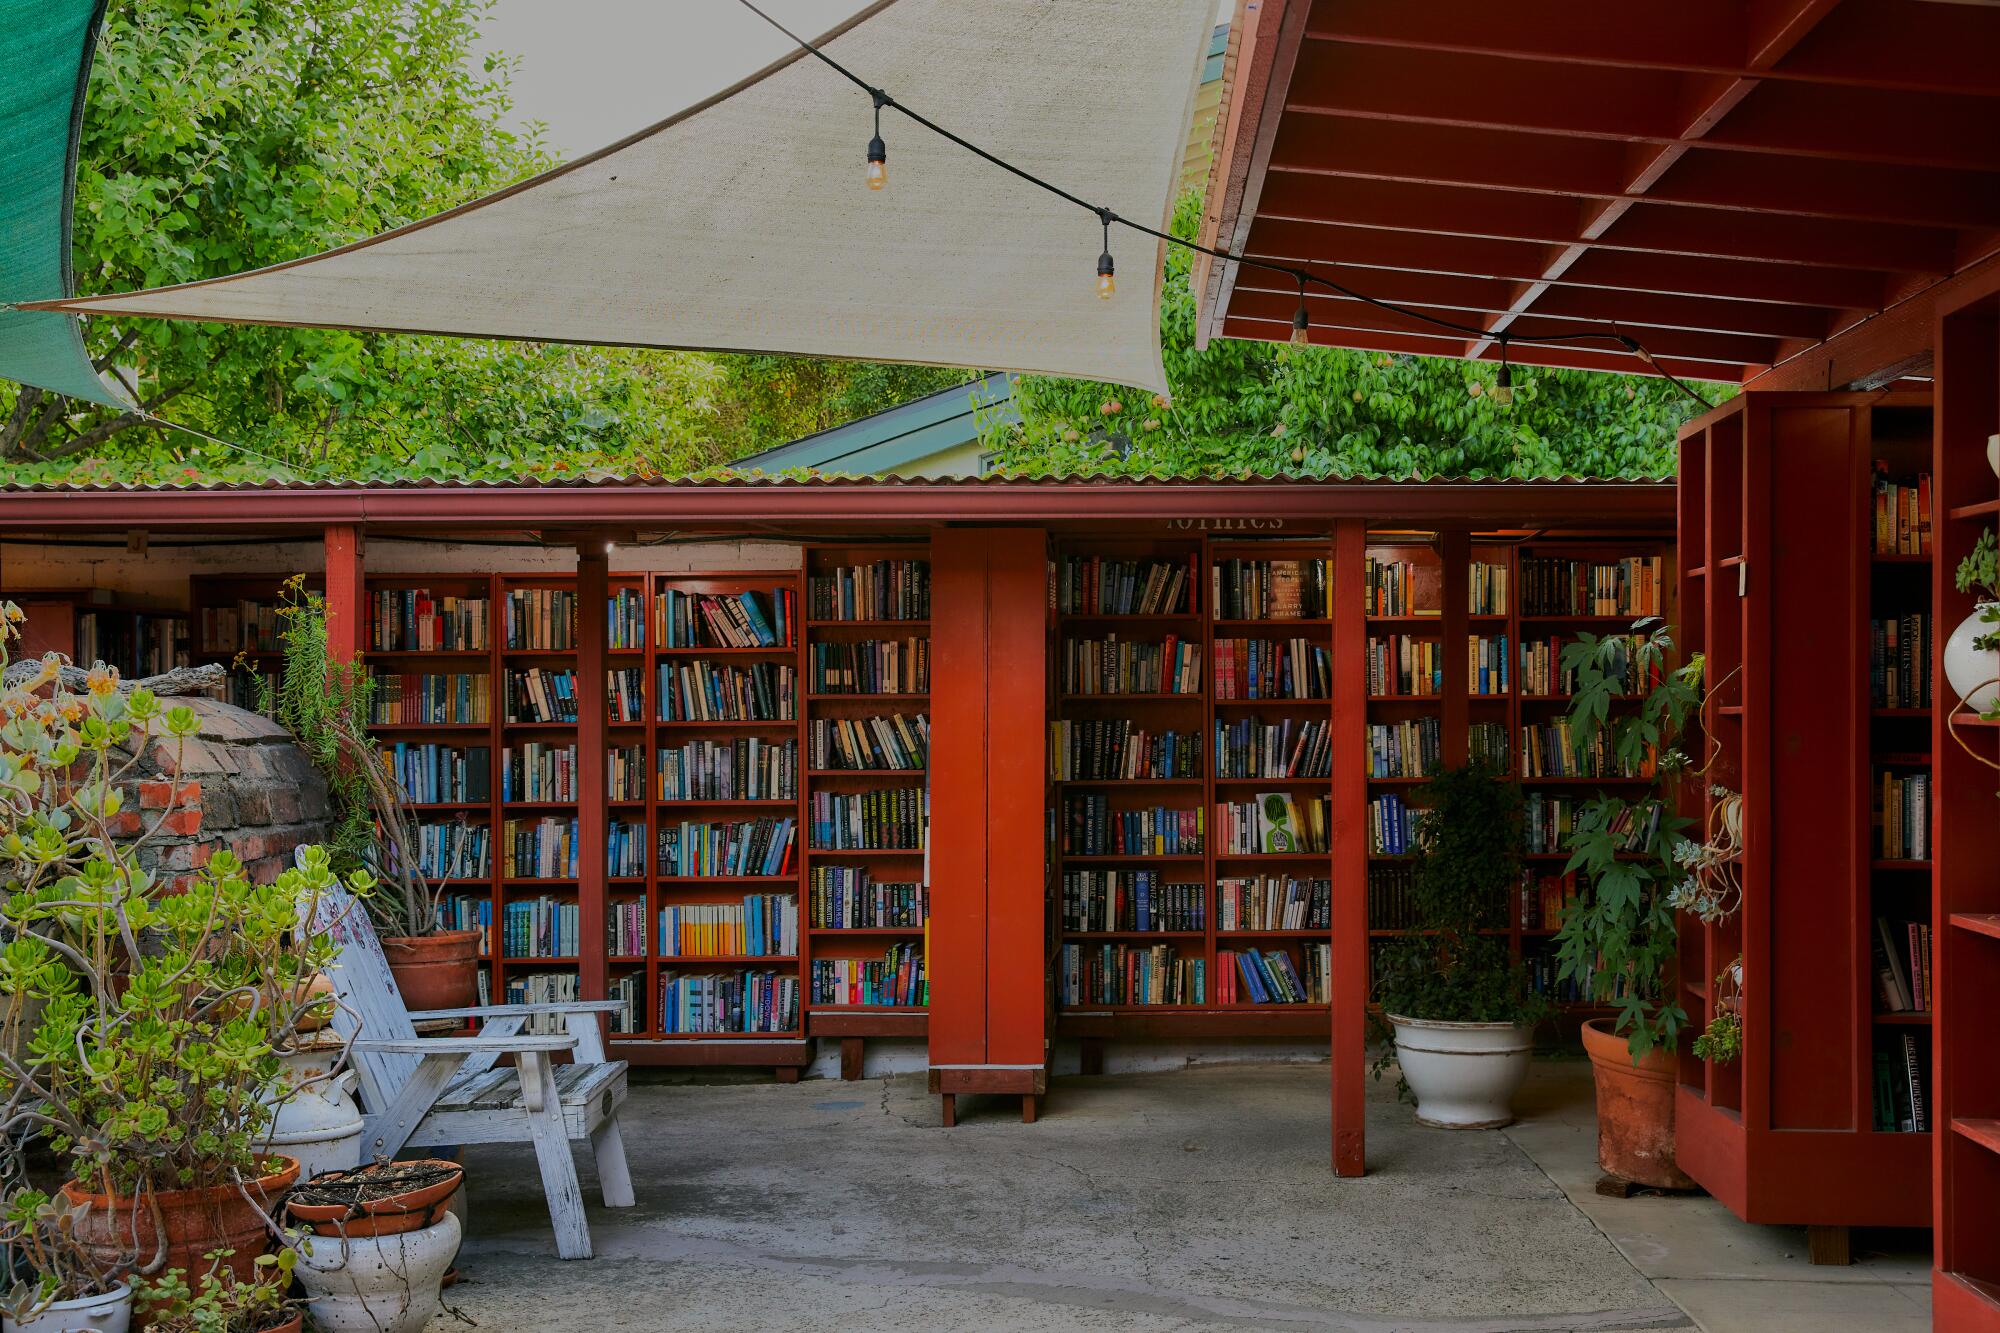 Inside Bart's Books, walls of books across varying genres surround the courtyard.